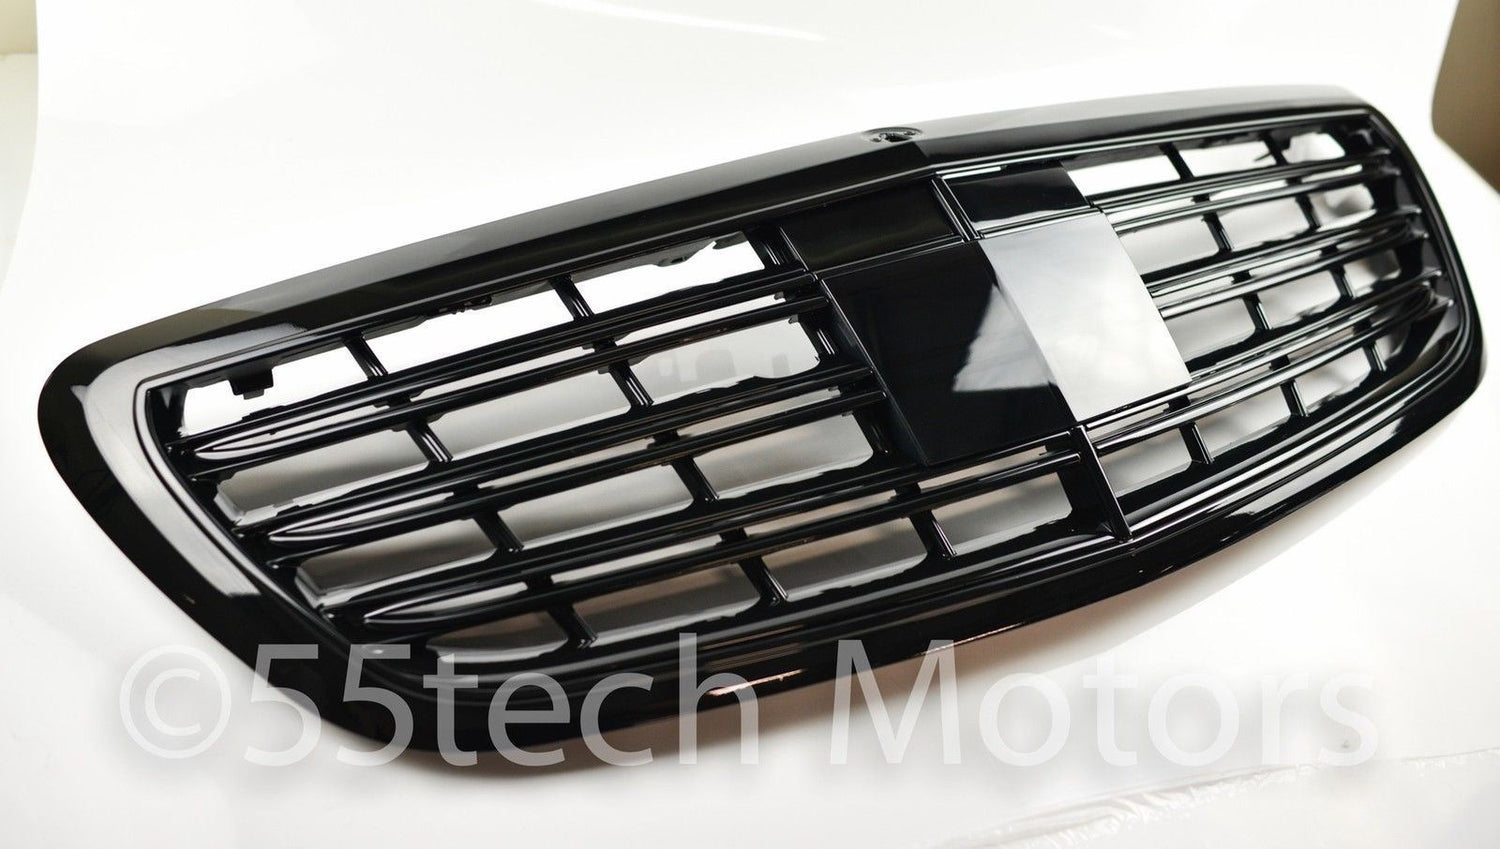 MERCEDES W222 NEW S-CLASS S65 MAYBACH STYLE GRILLE - 55tech Motors